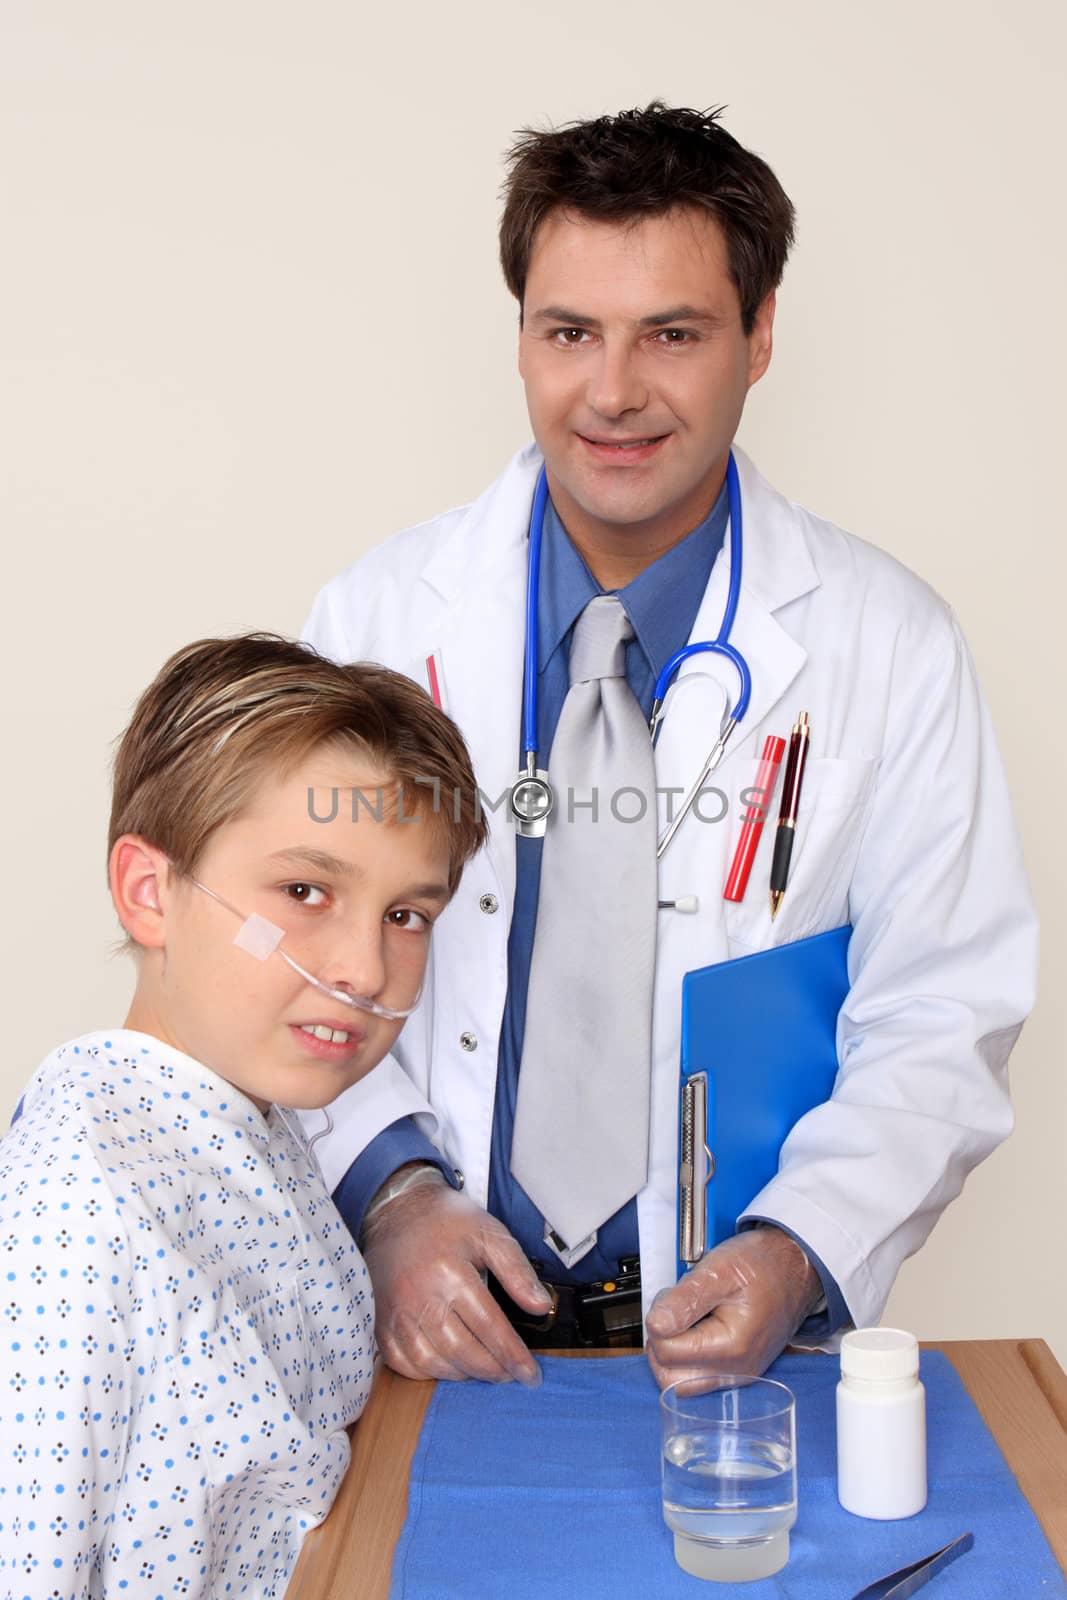 A doctor stands beside a young patient